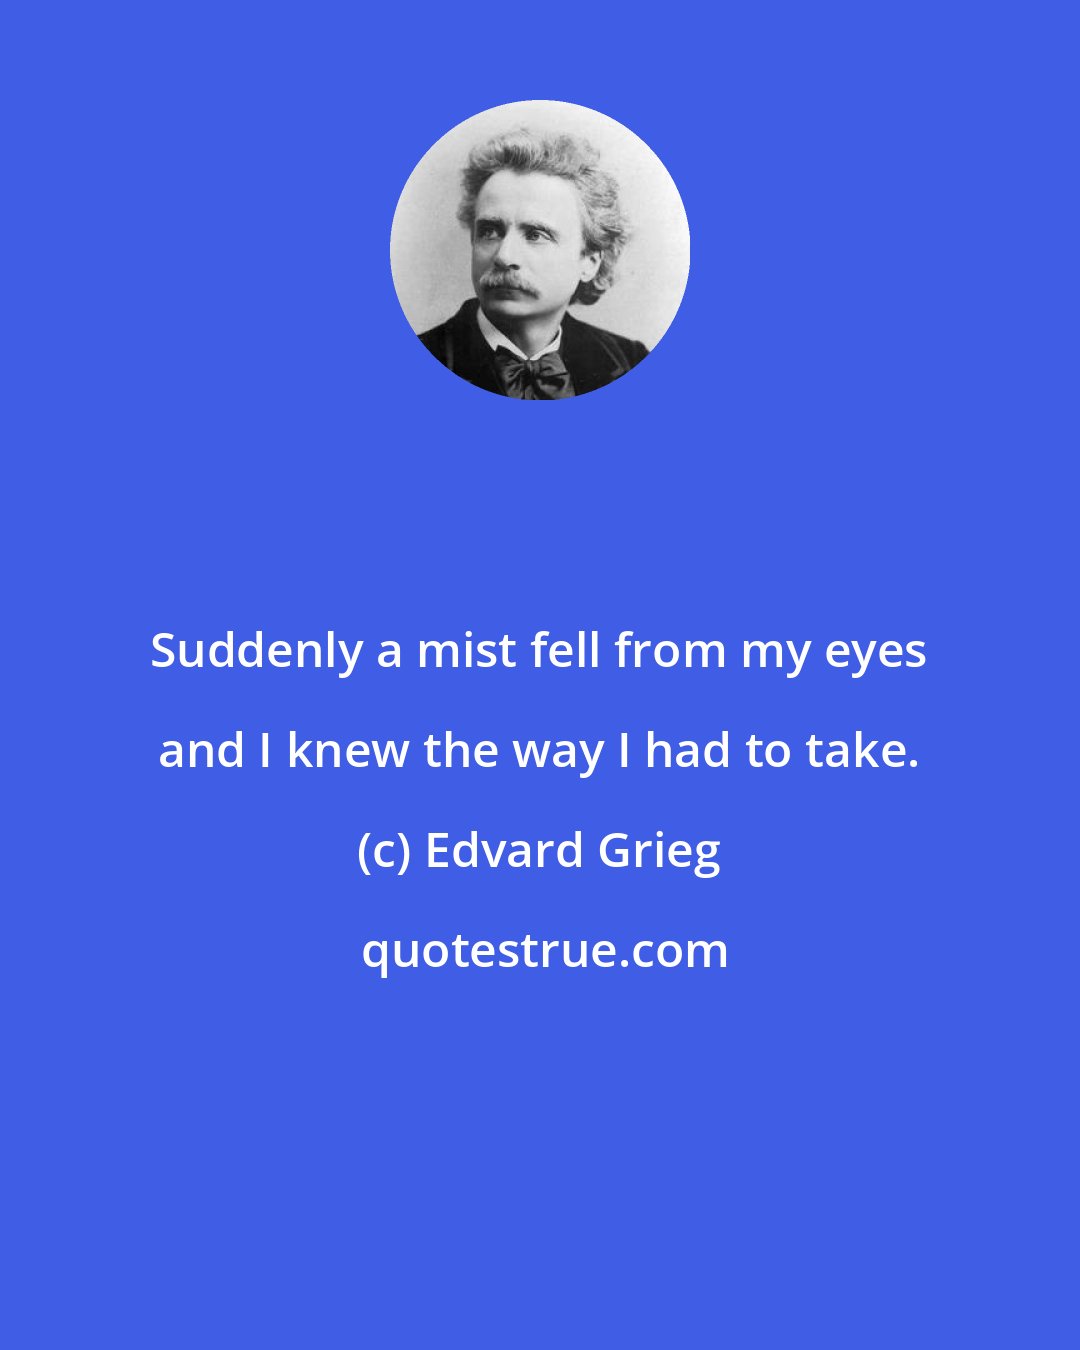 Edvard Grieg: Suddenly a mist fell from my eyes and I knew the way I had to take.